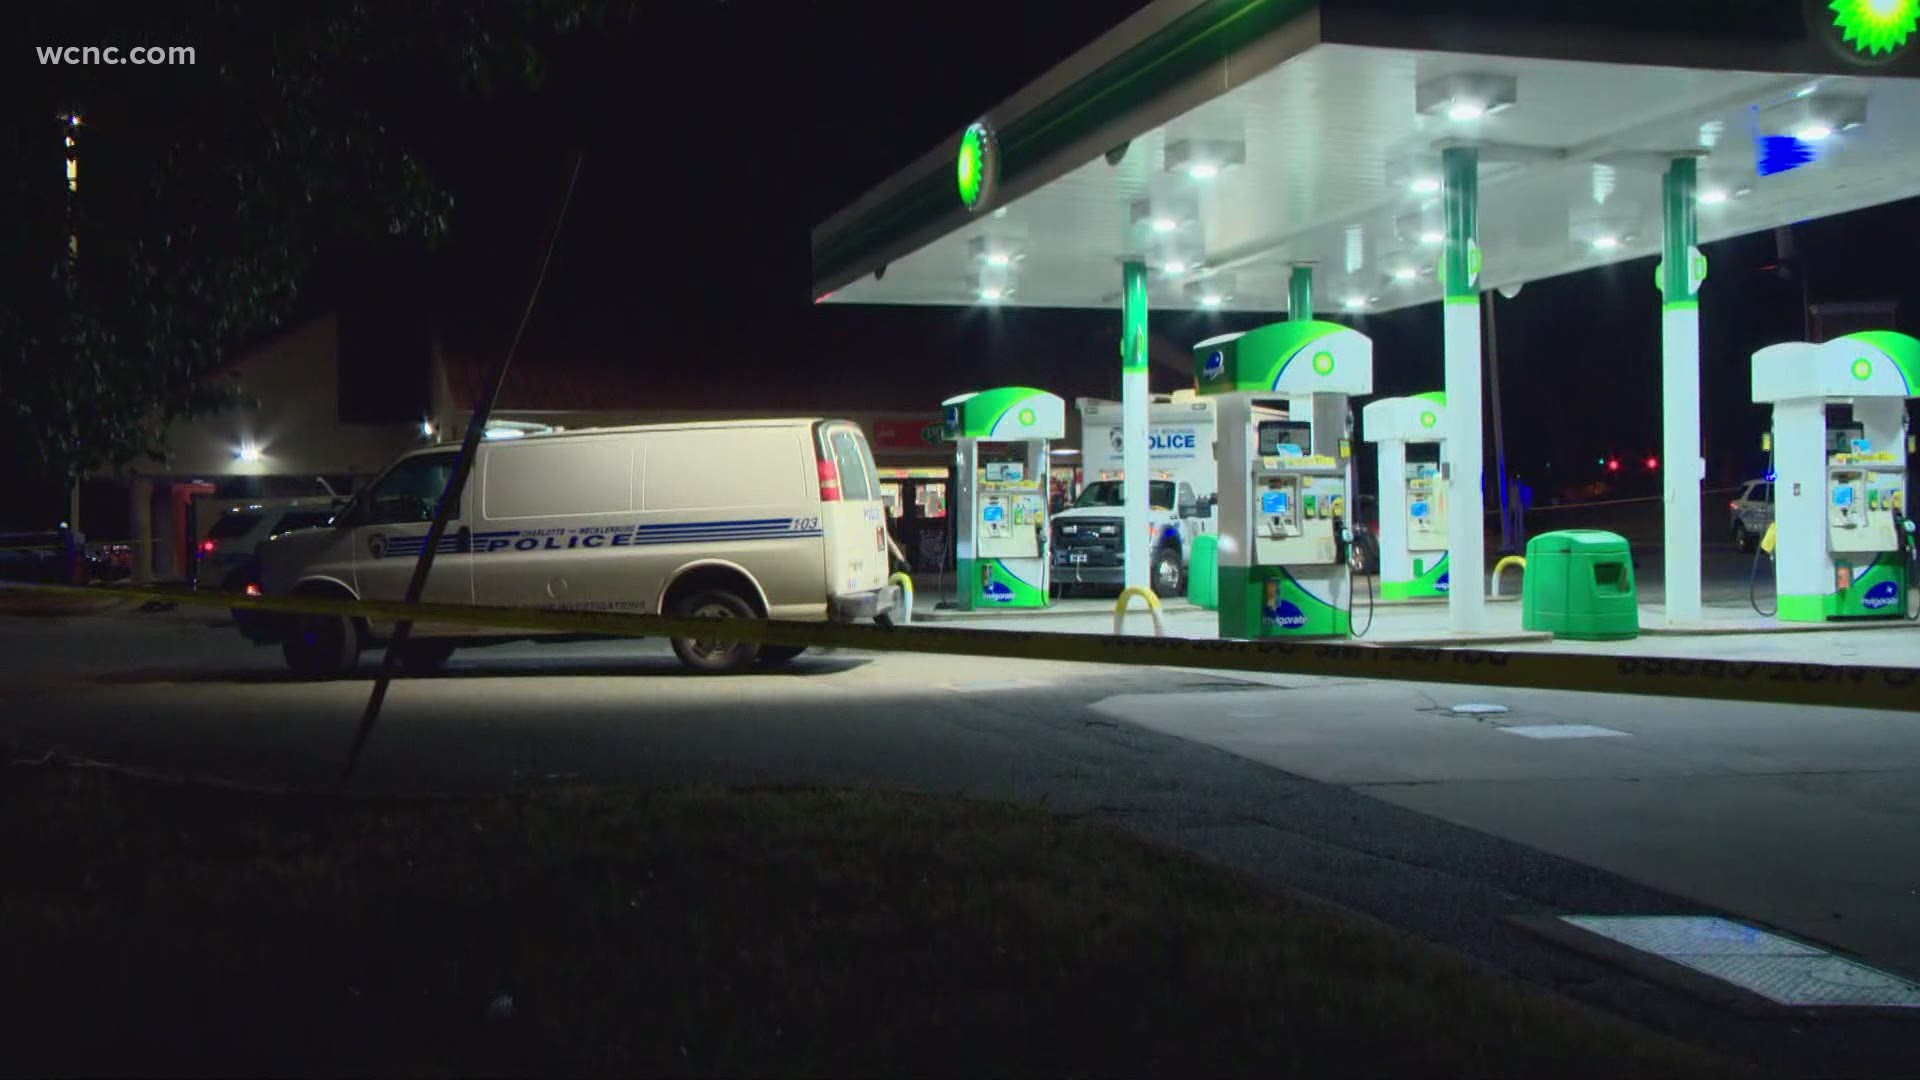 Police say one person has died after a shooting at an east Charlotte gas station.